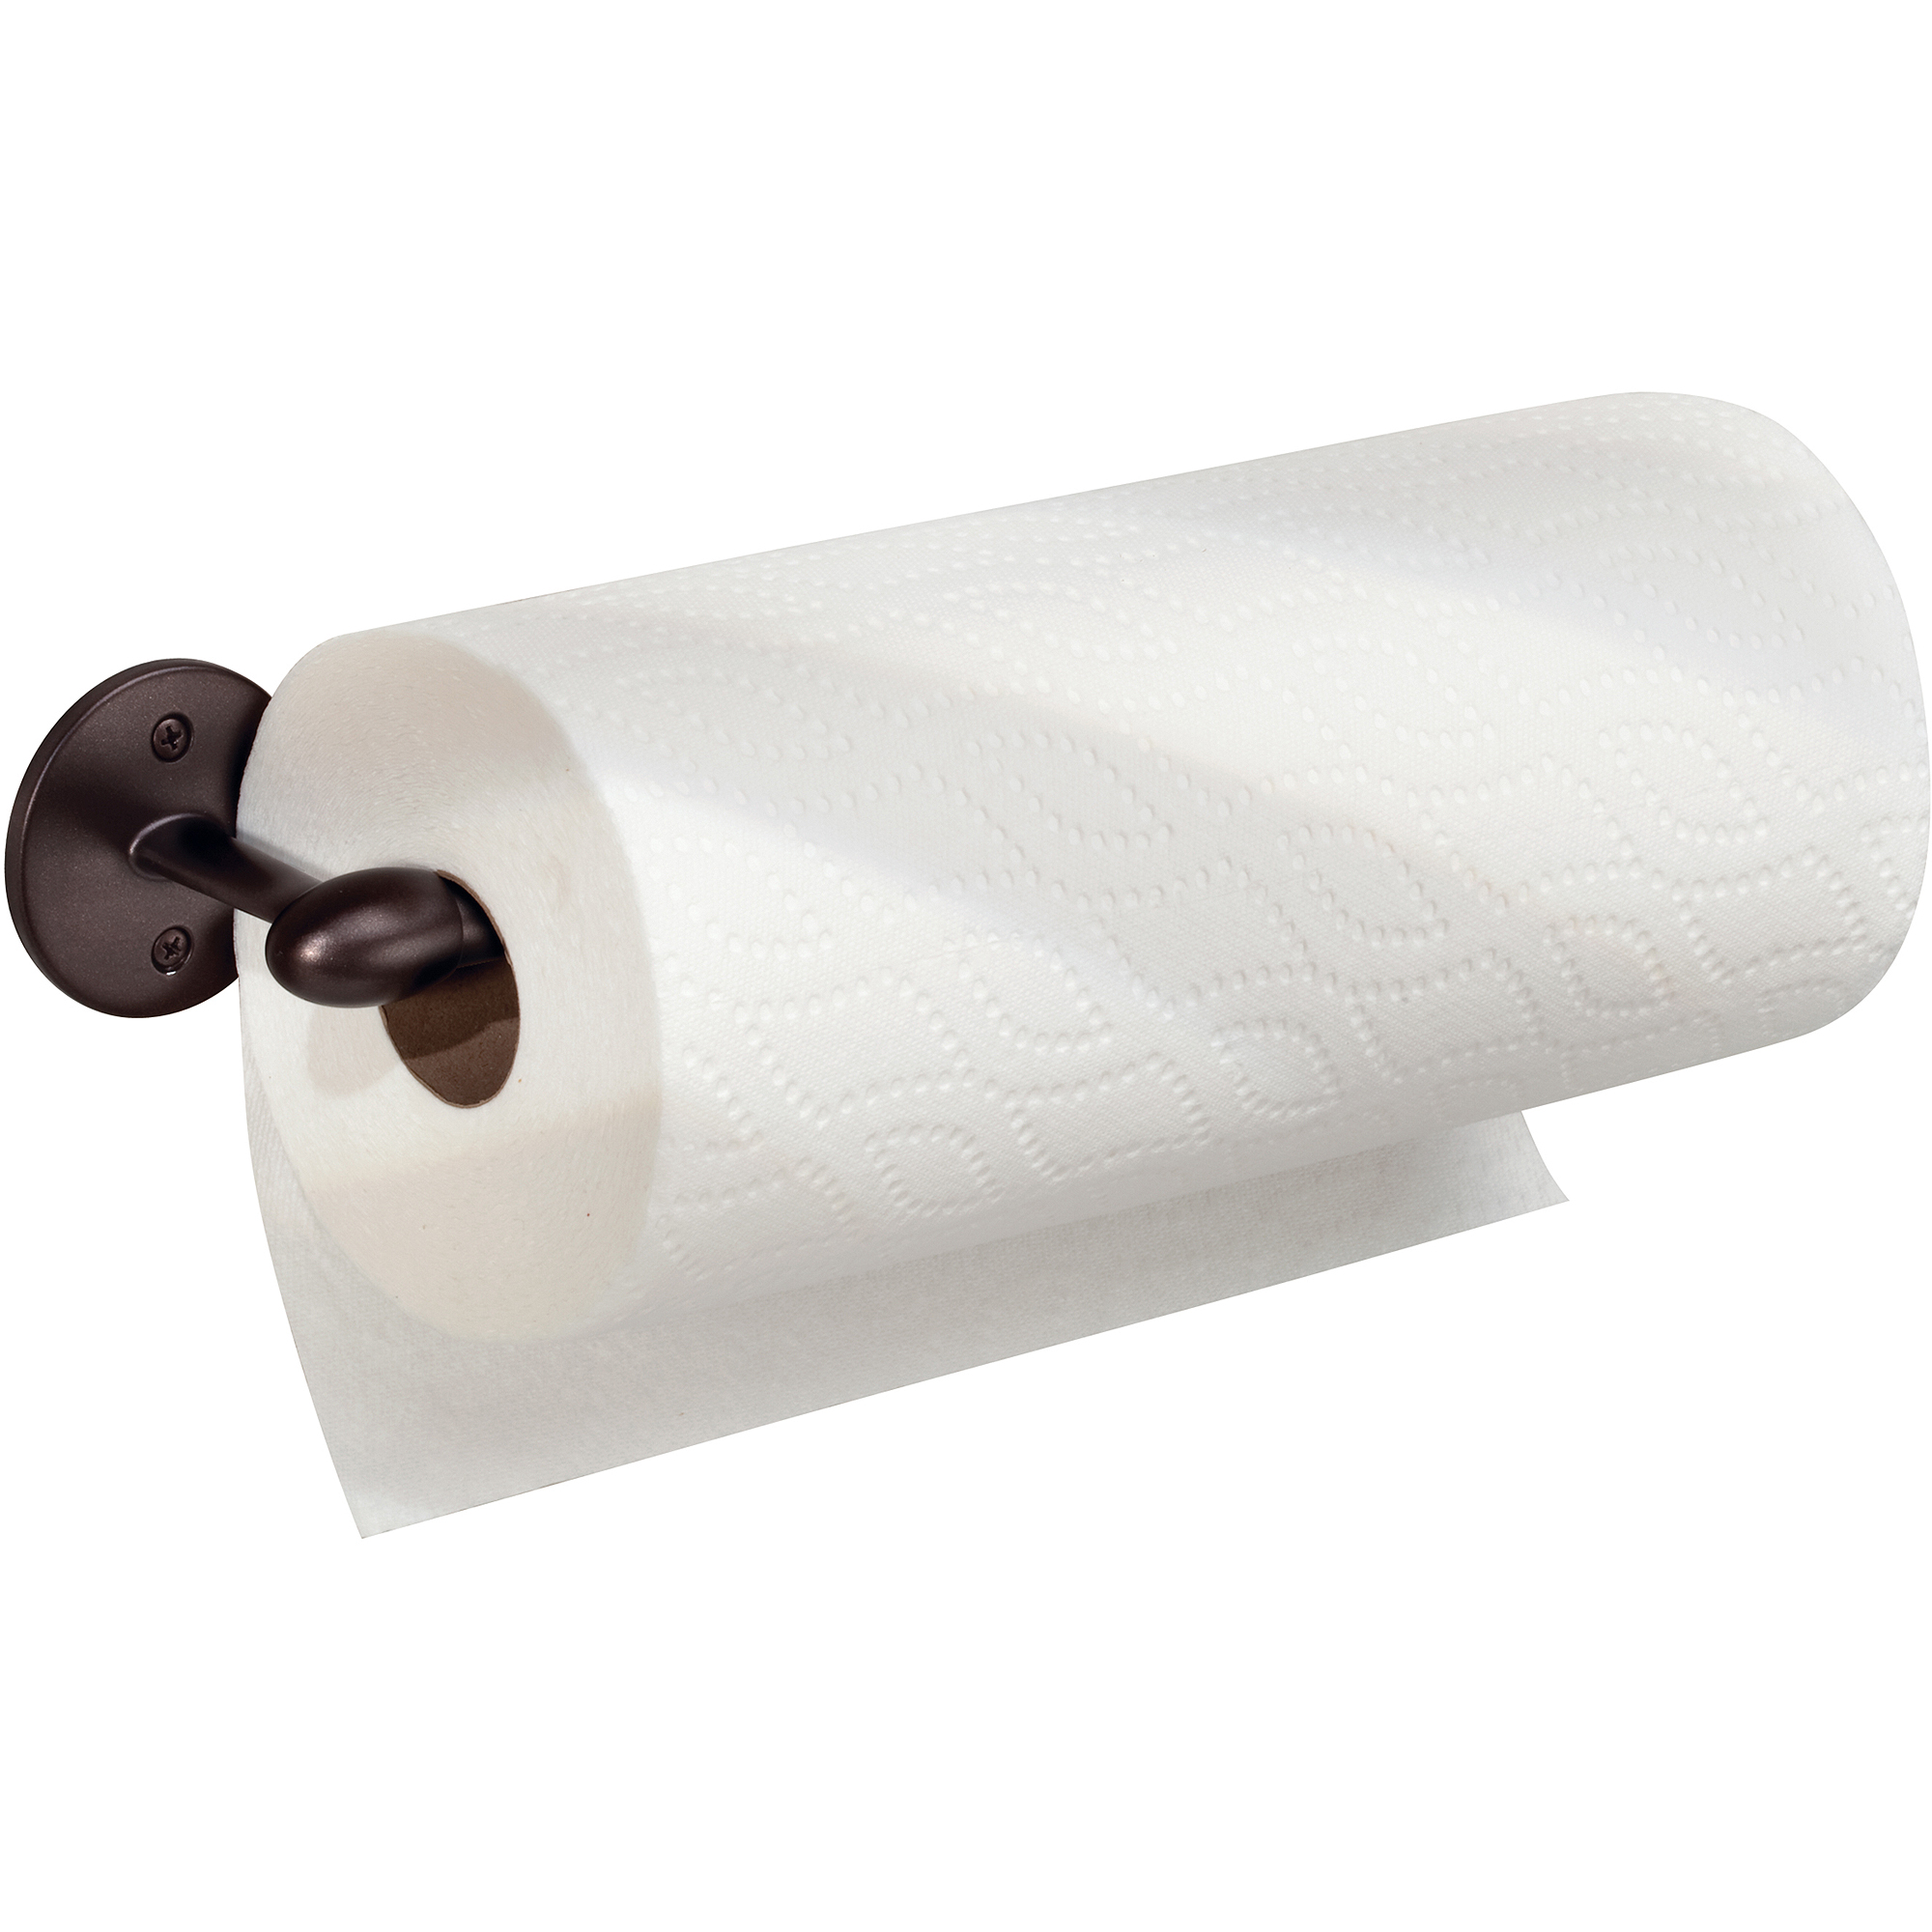 iDesign Orbinni Wall Mounted Paper Towel Holder - image 3 of 5